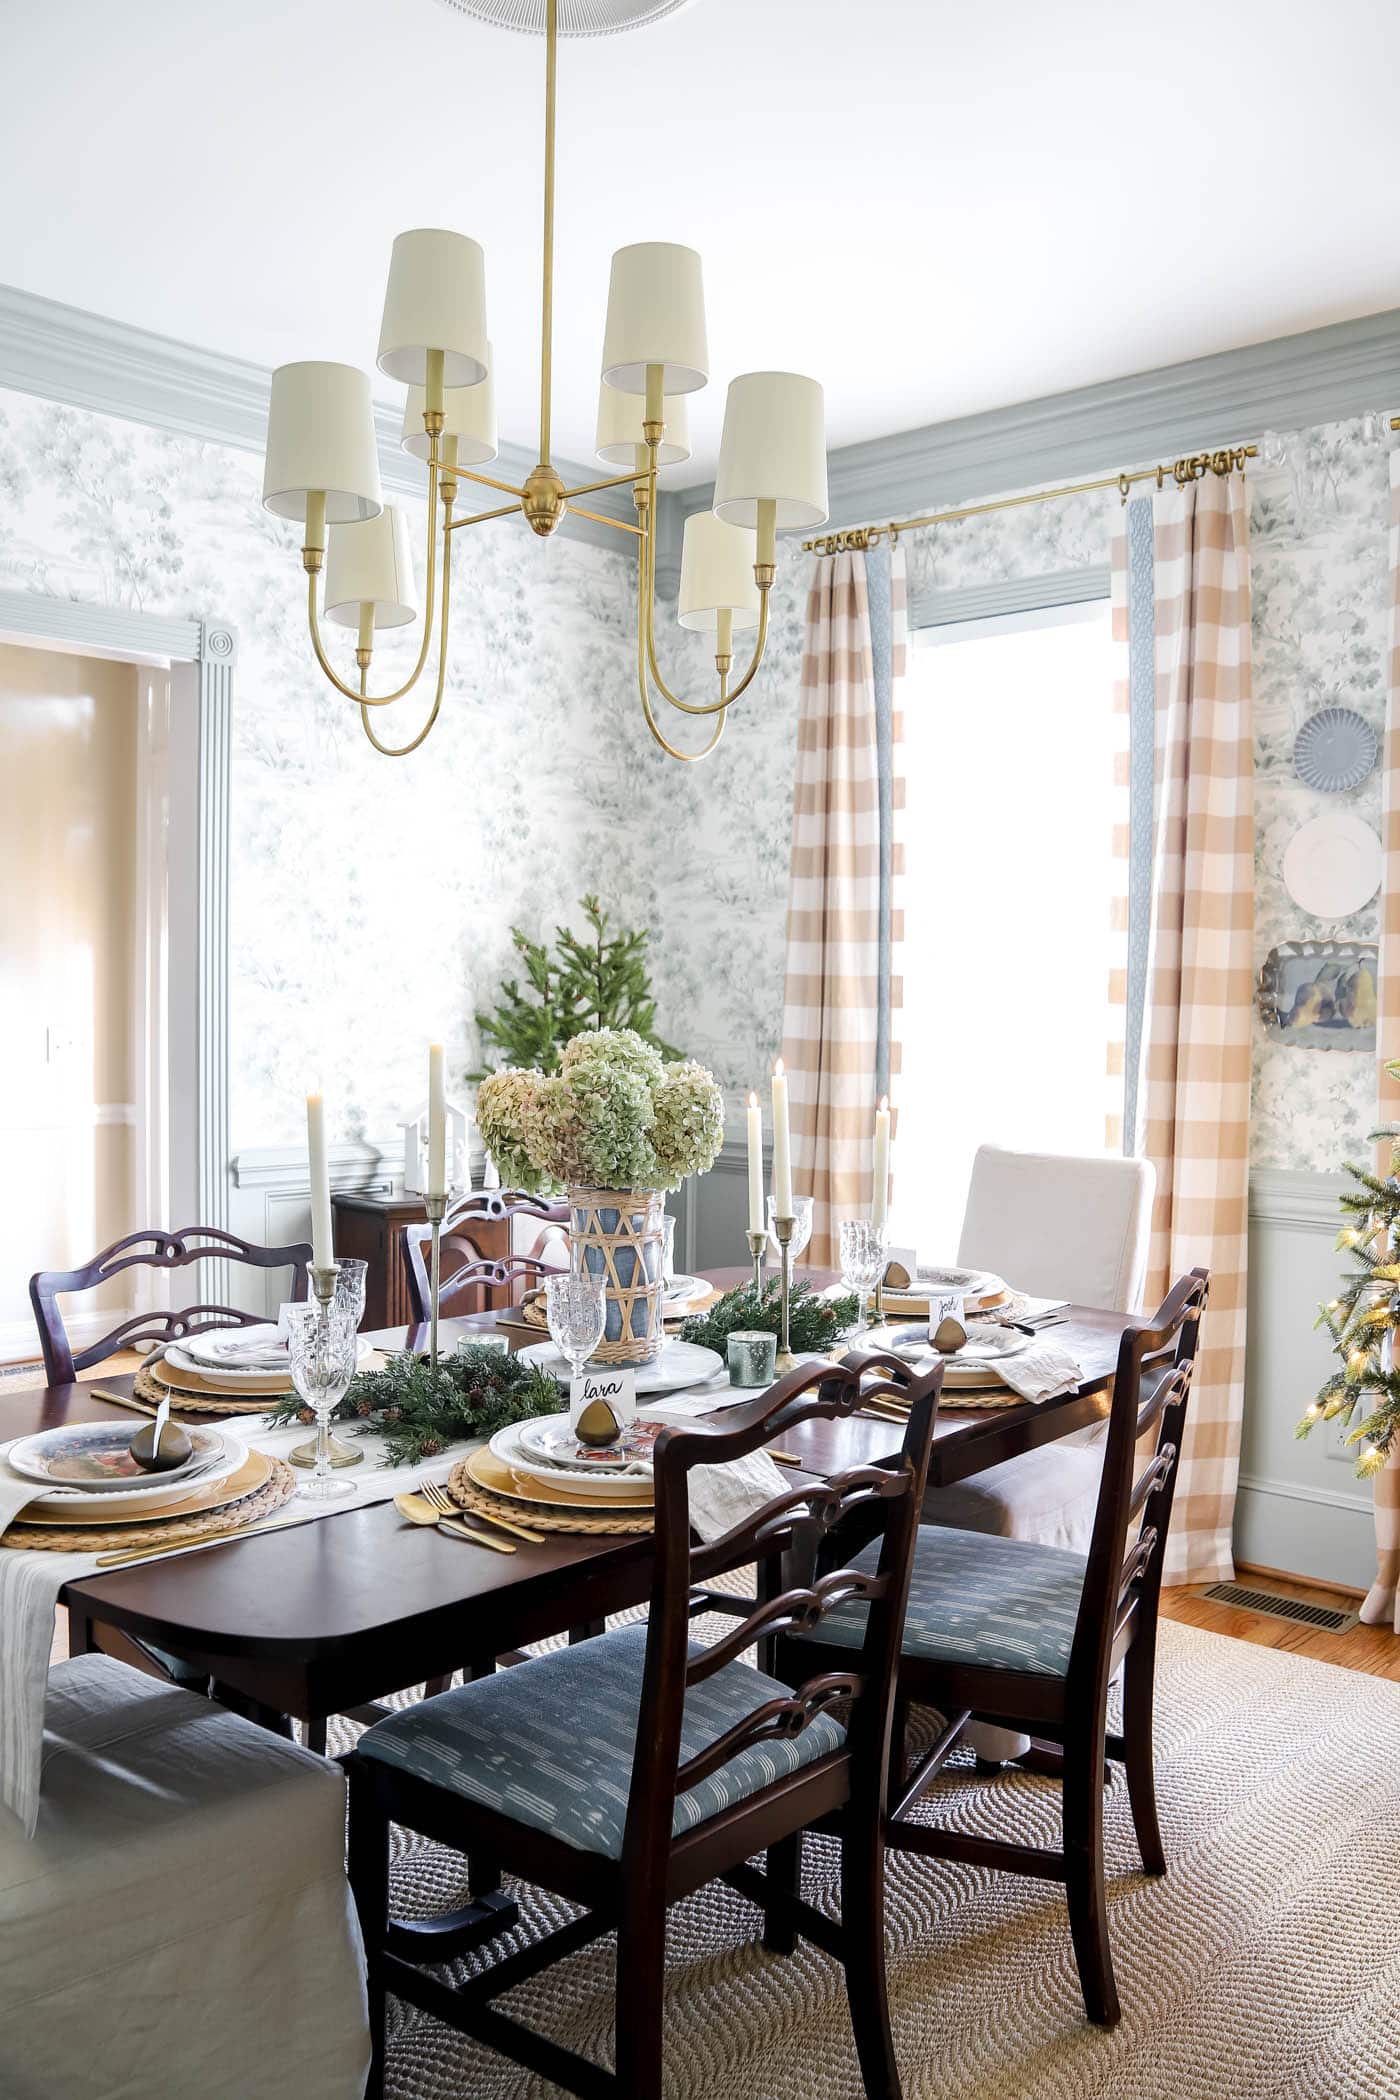 traditional dining room at christmas